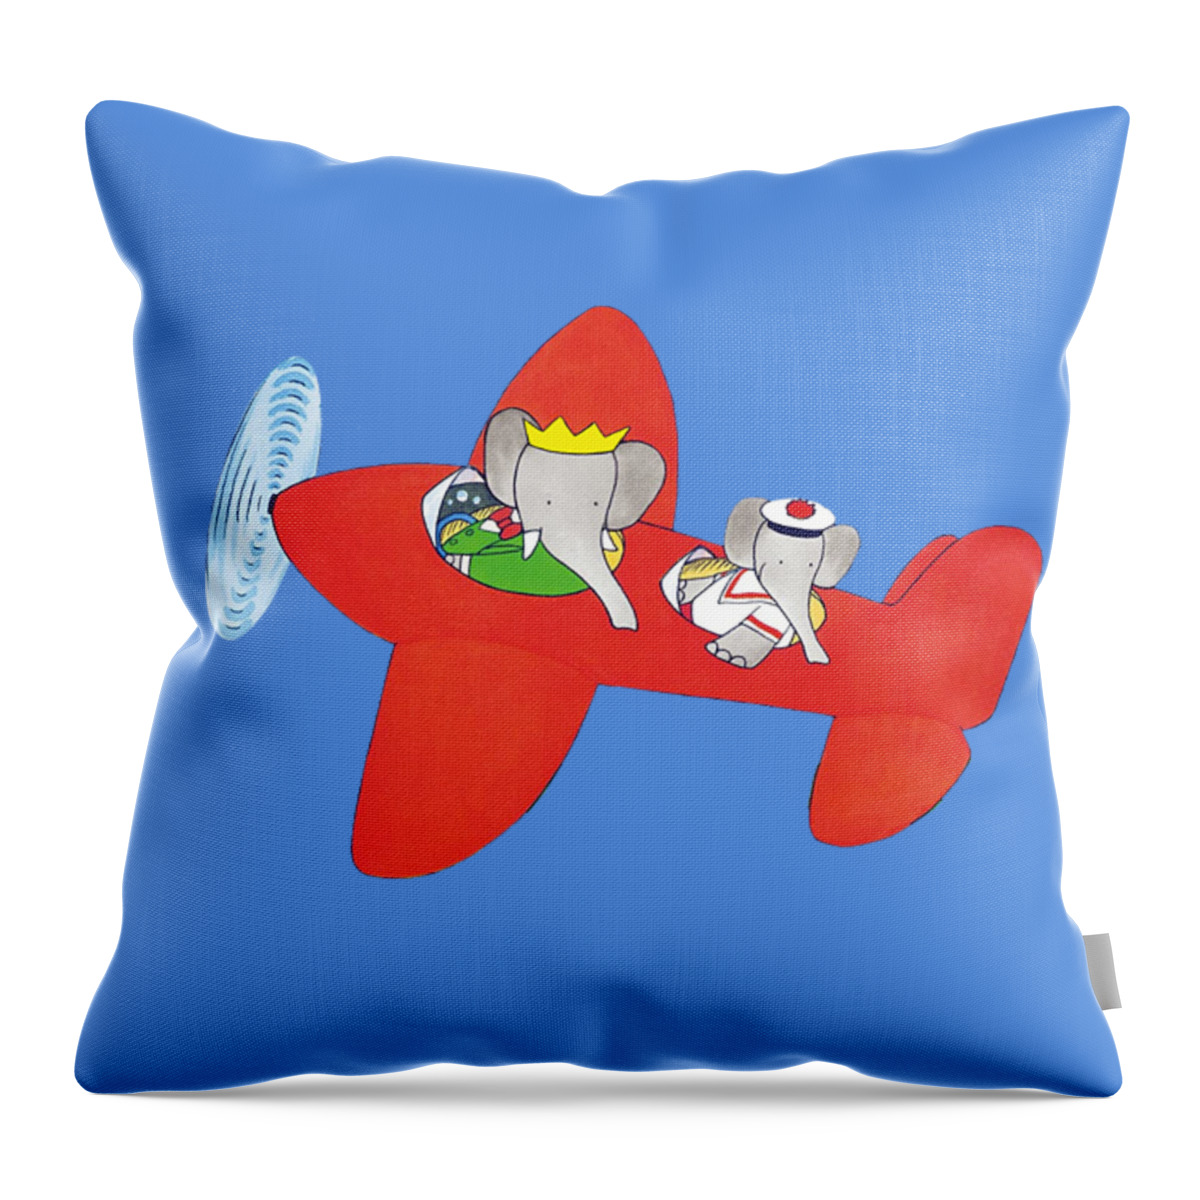 Babar Riding A Bike Throw Pillow featuring the drawing Babar flying a plane by Jean de Brunhoff